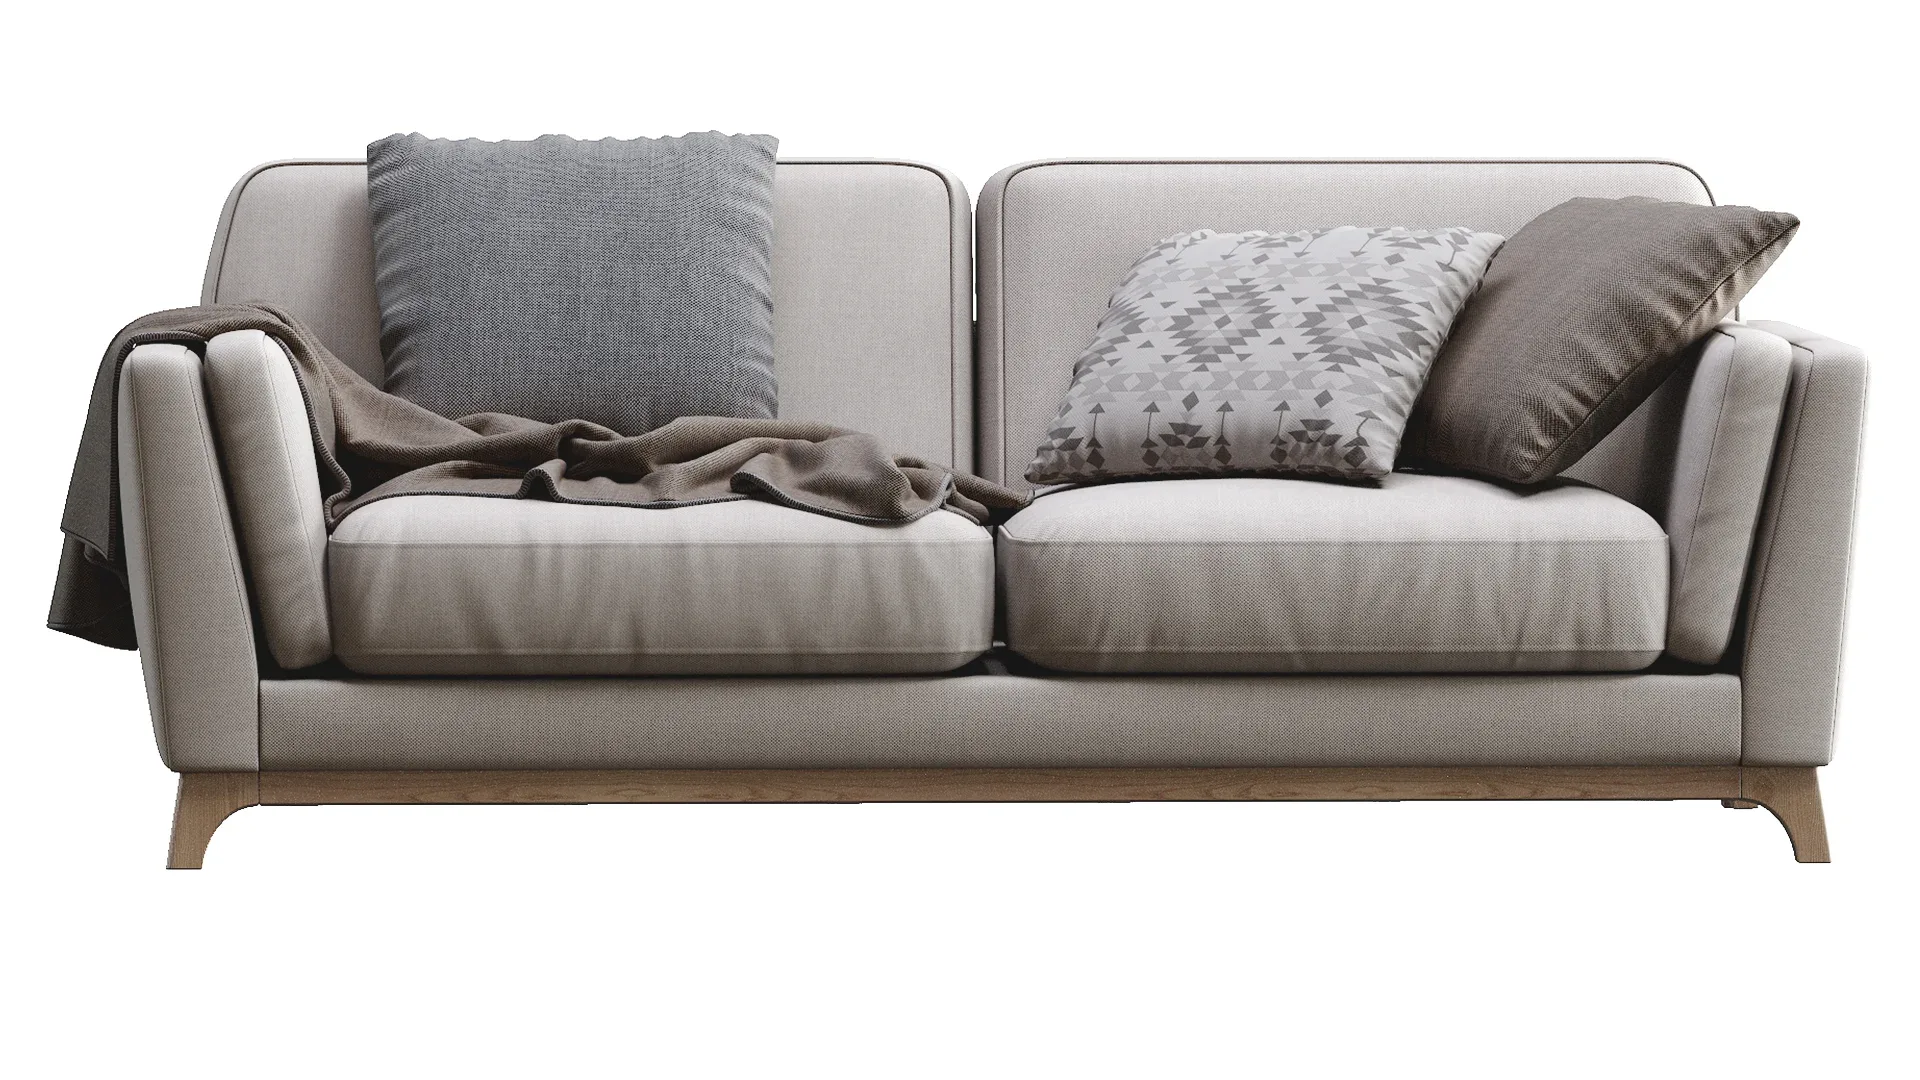 Ceni Volcanic Gray Sofa By Article 2